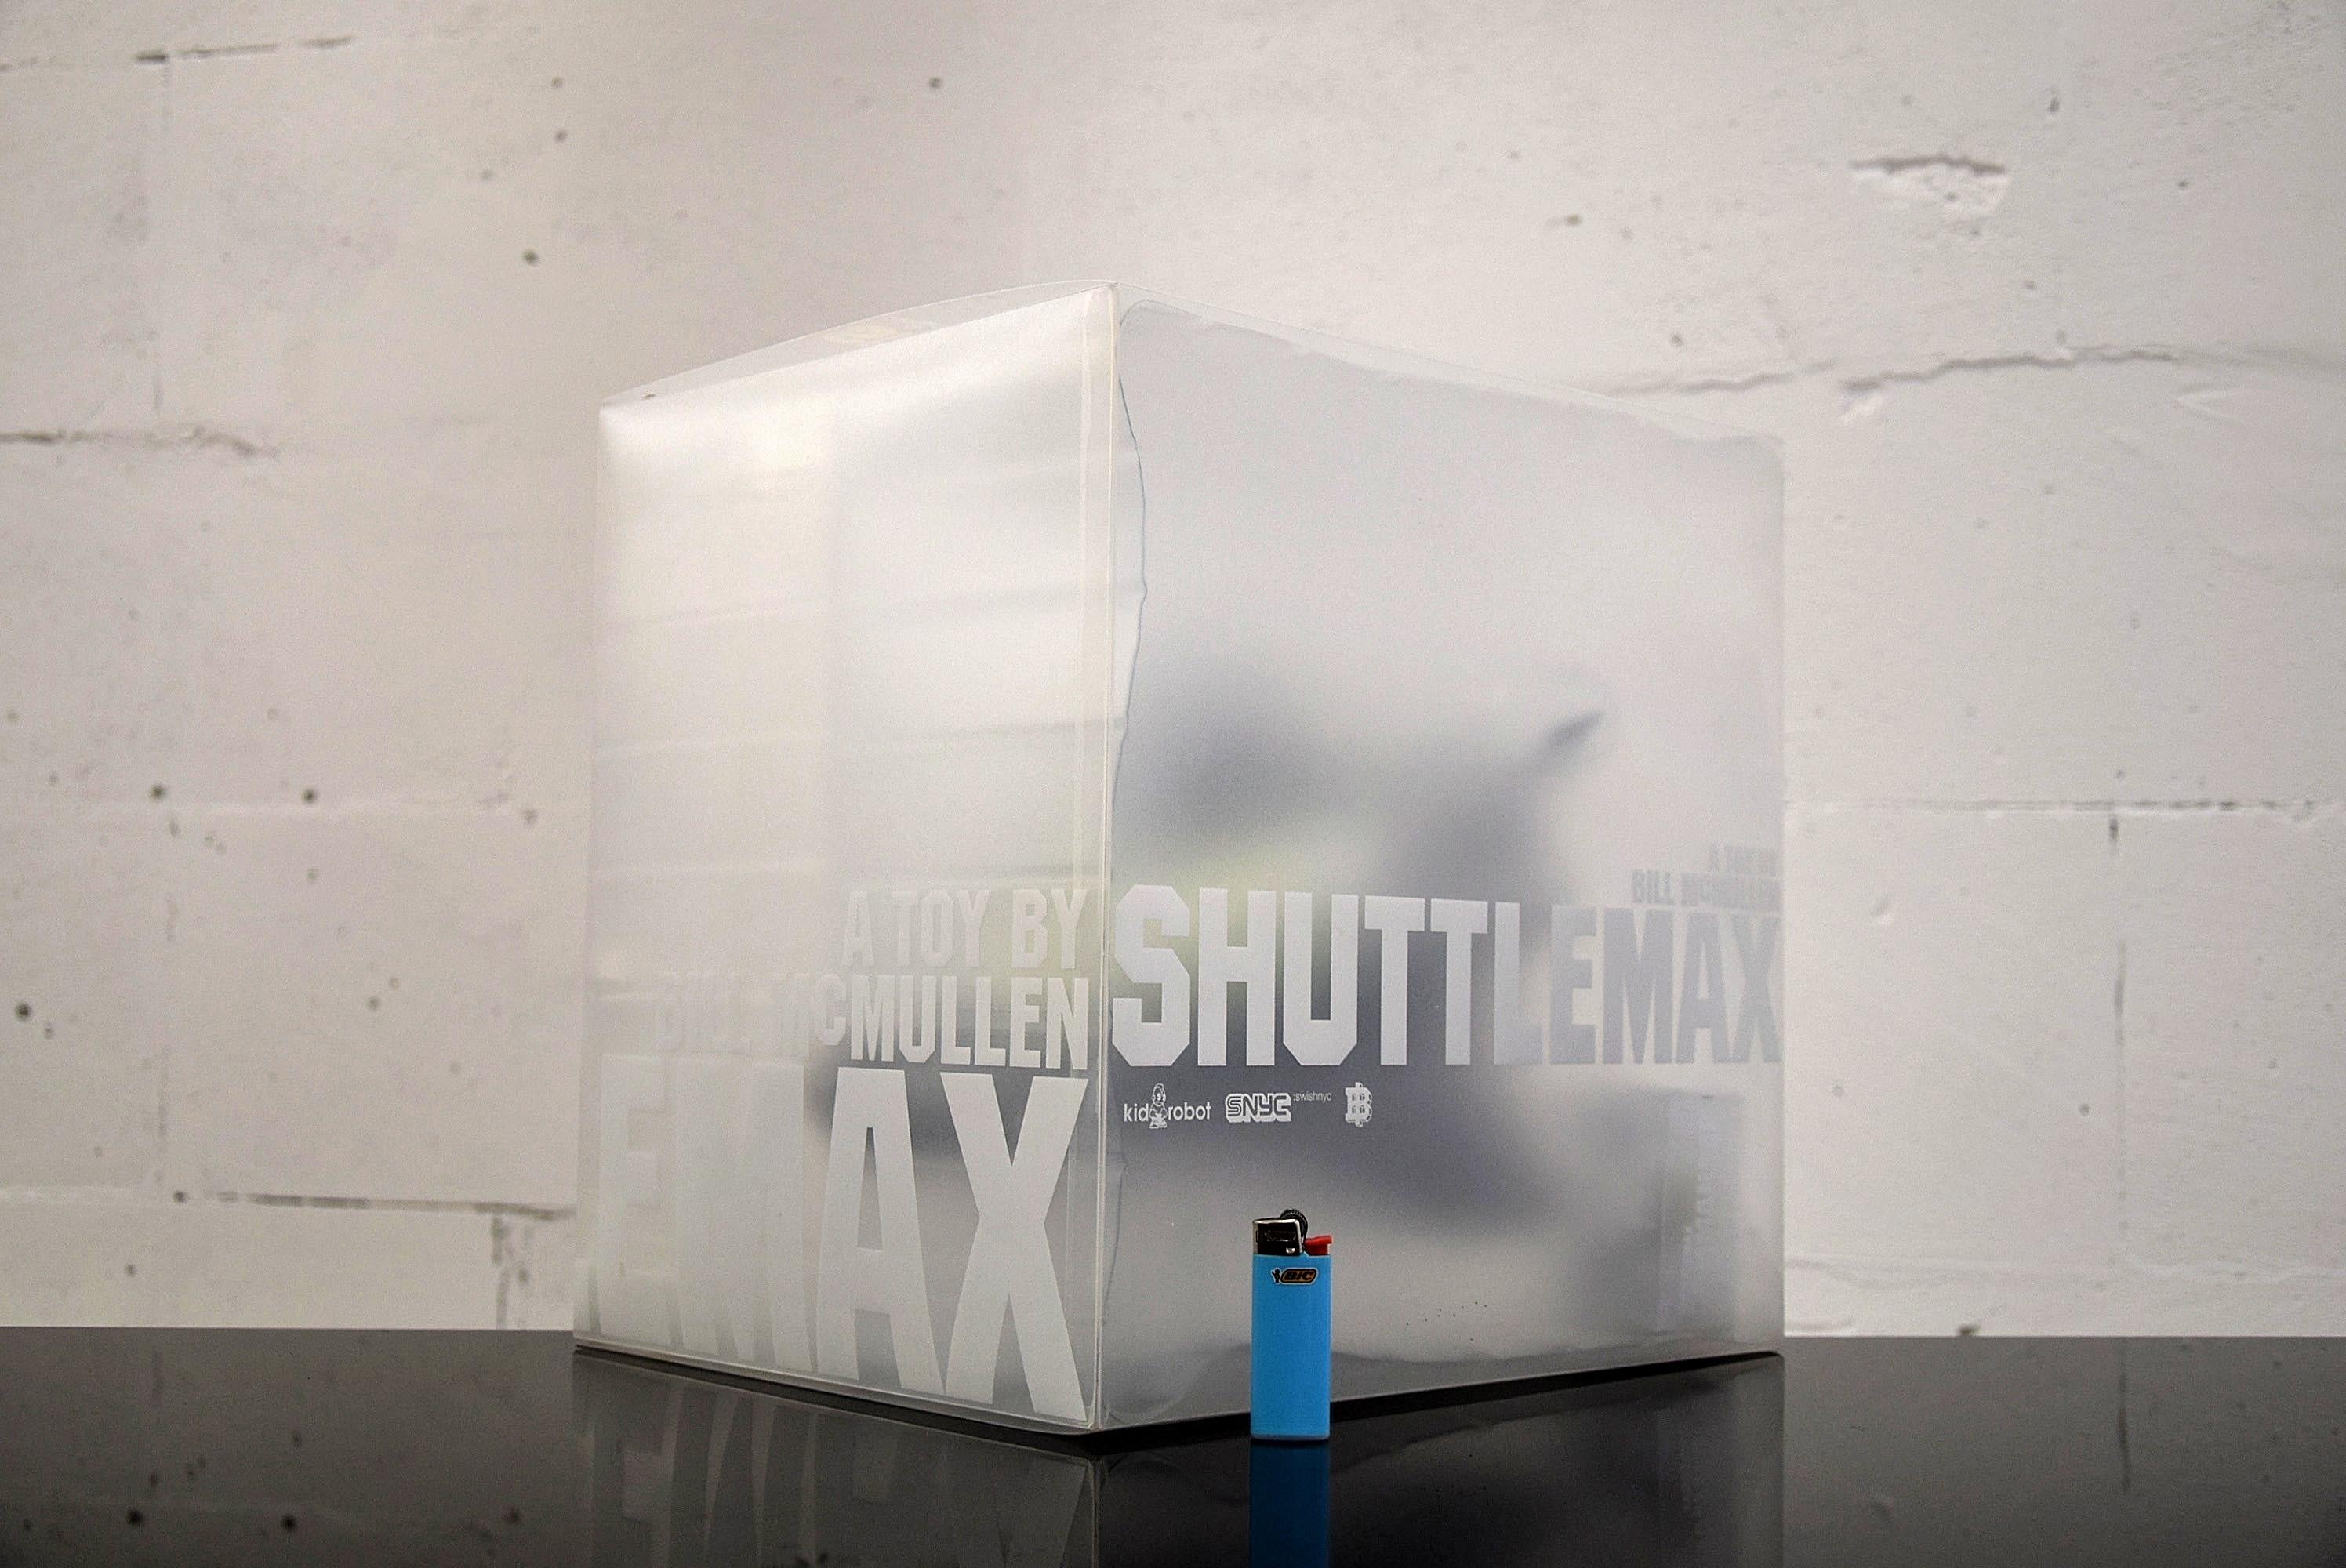 Impossible to find Shuttlemax designer toy by bill McMullen. Only 200 pcs produced in 2006. This piece is in mint condition and has always been stored in a smoke free, dry dark room out of sunlight.
The ShuttleMax by Bill McMullen is the vinyl